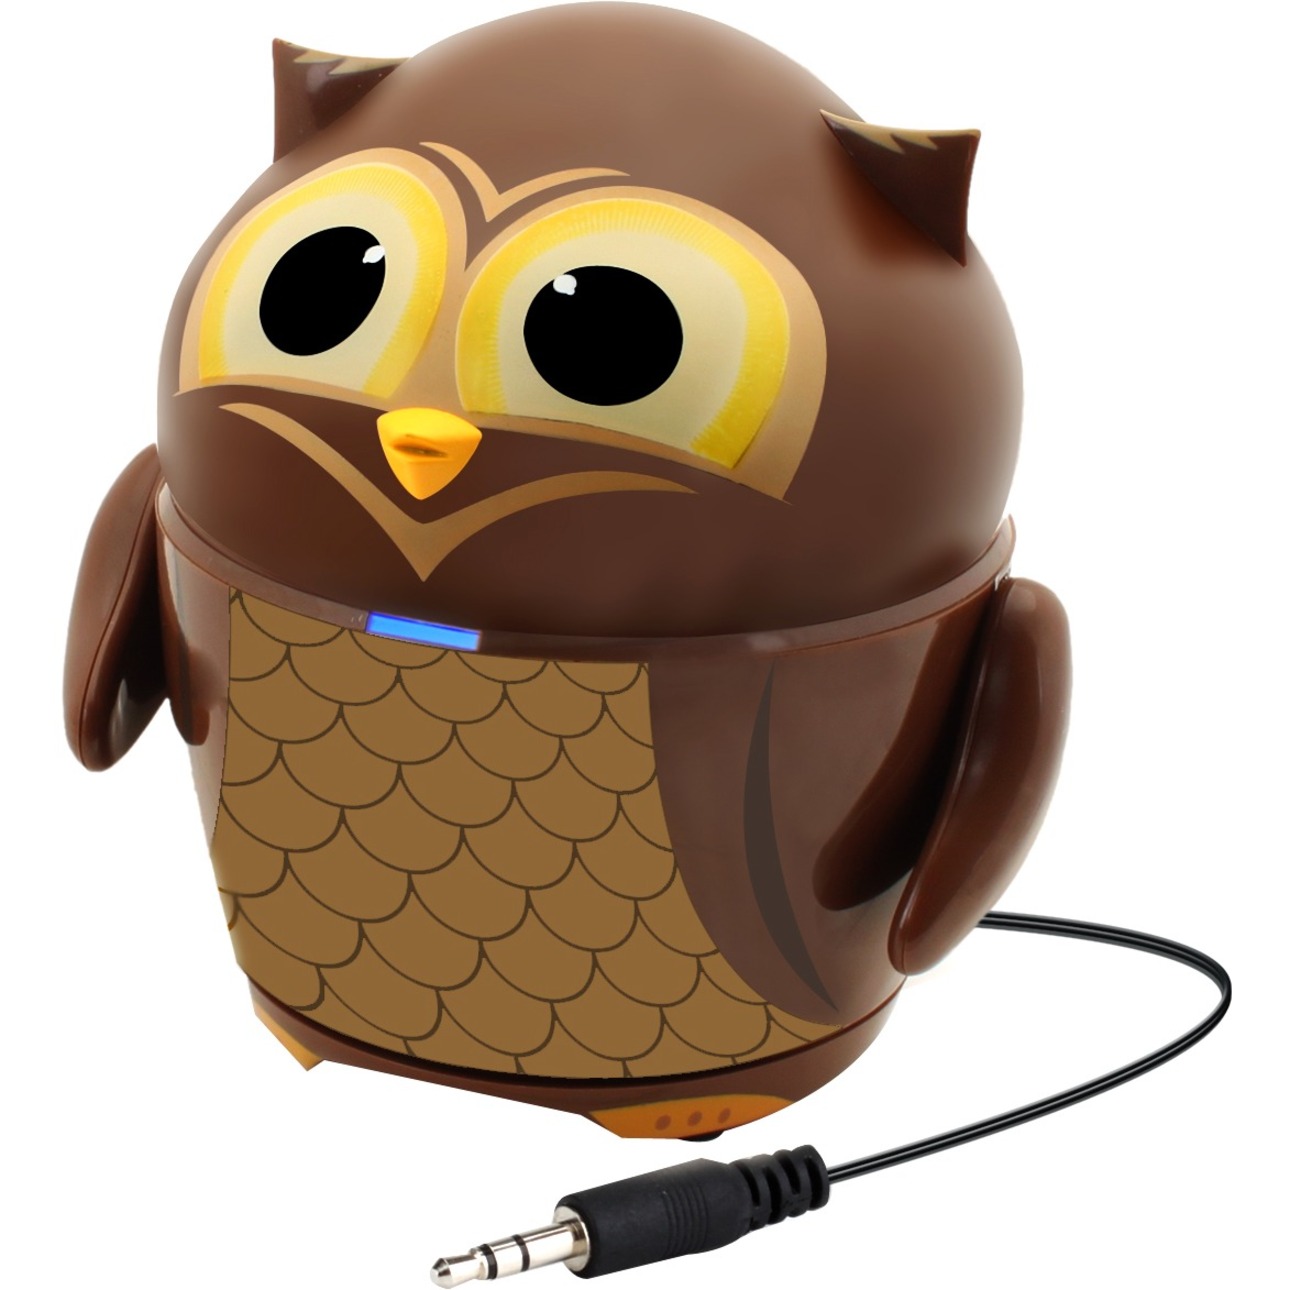 GOgroove Groove Pal GG-PAL-OWL 2.0 Portable Speaker System, 4 W RMS, Brown - image 1 of 7